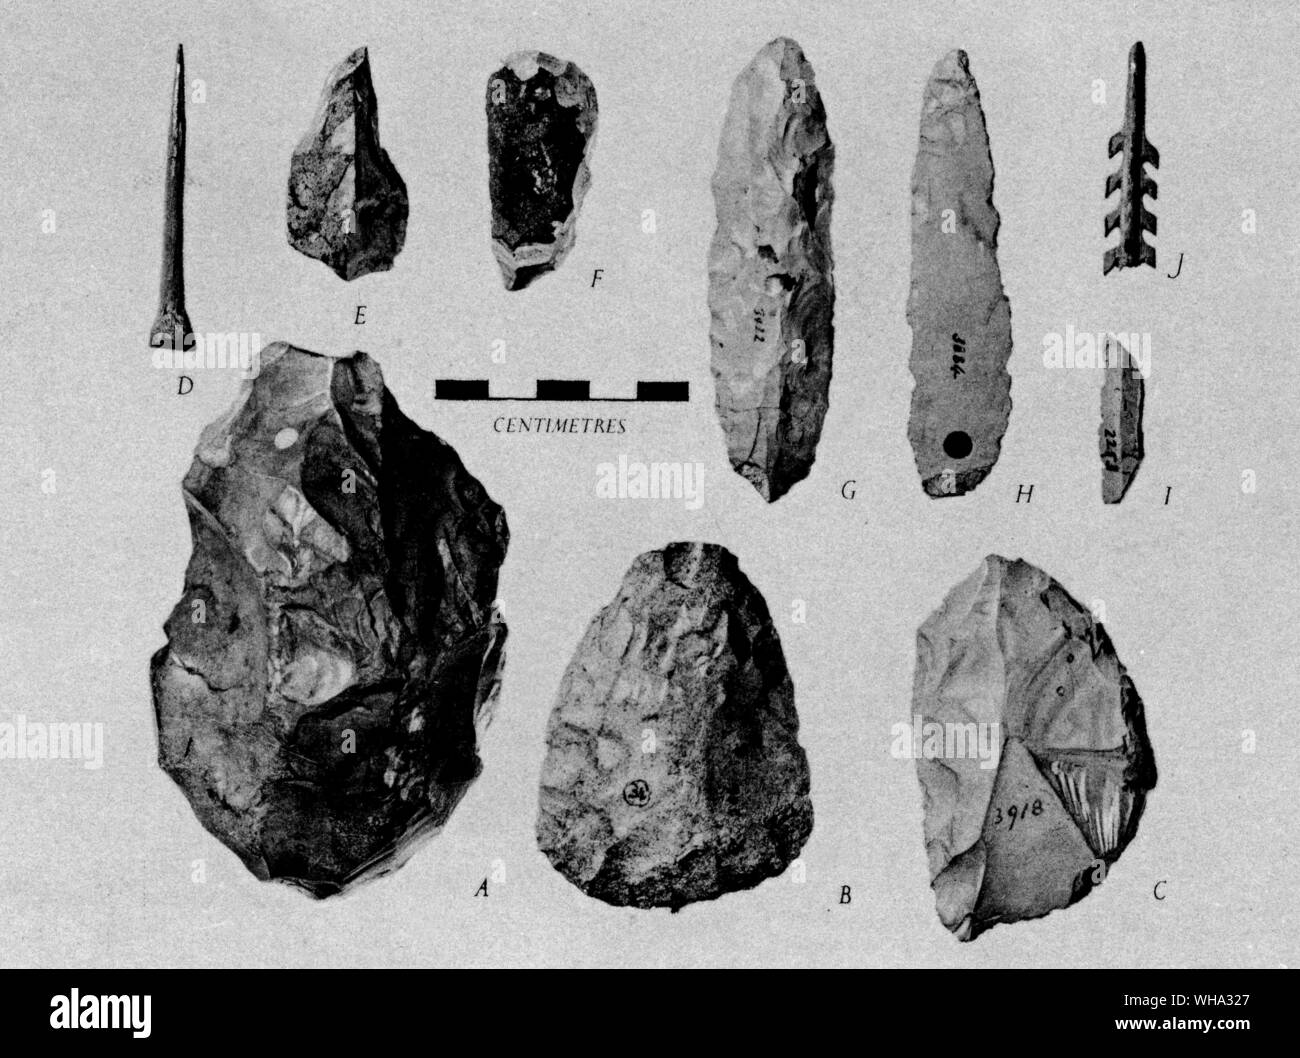 Fossil man: Early stone age artifacts from Kent's Cavern, Torquay, Devon. A - Lower palaeolithic; B & C - Middle palaeolithic; D-J - Upper palaeolithic. Stock Photo